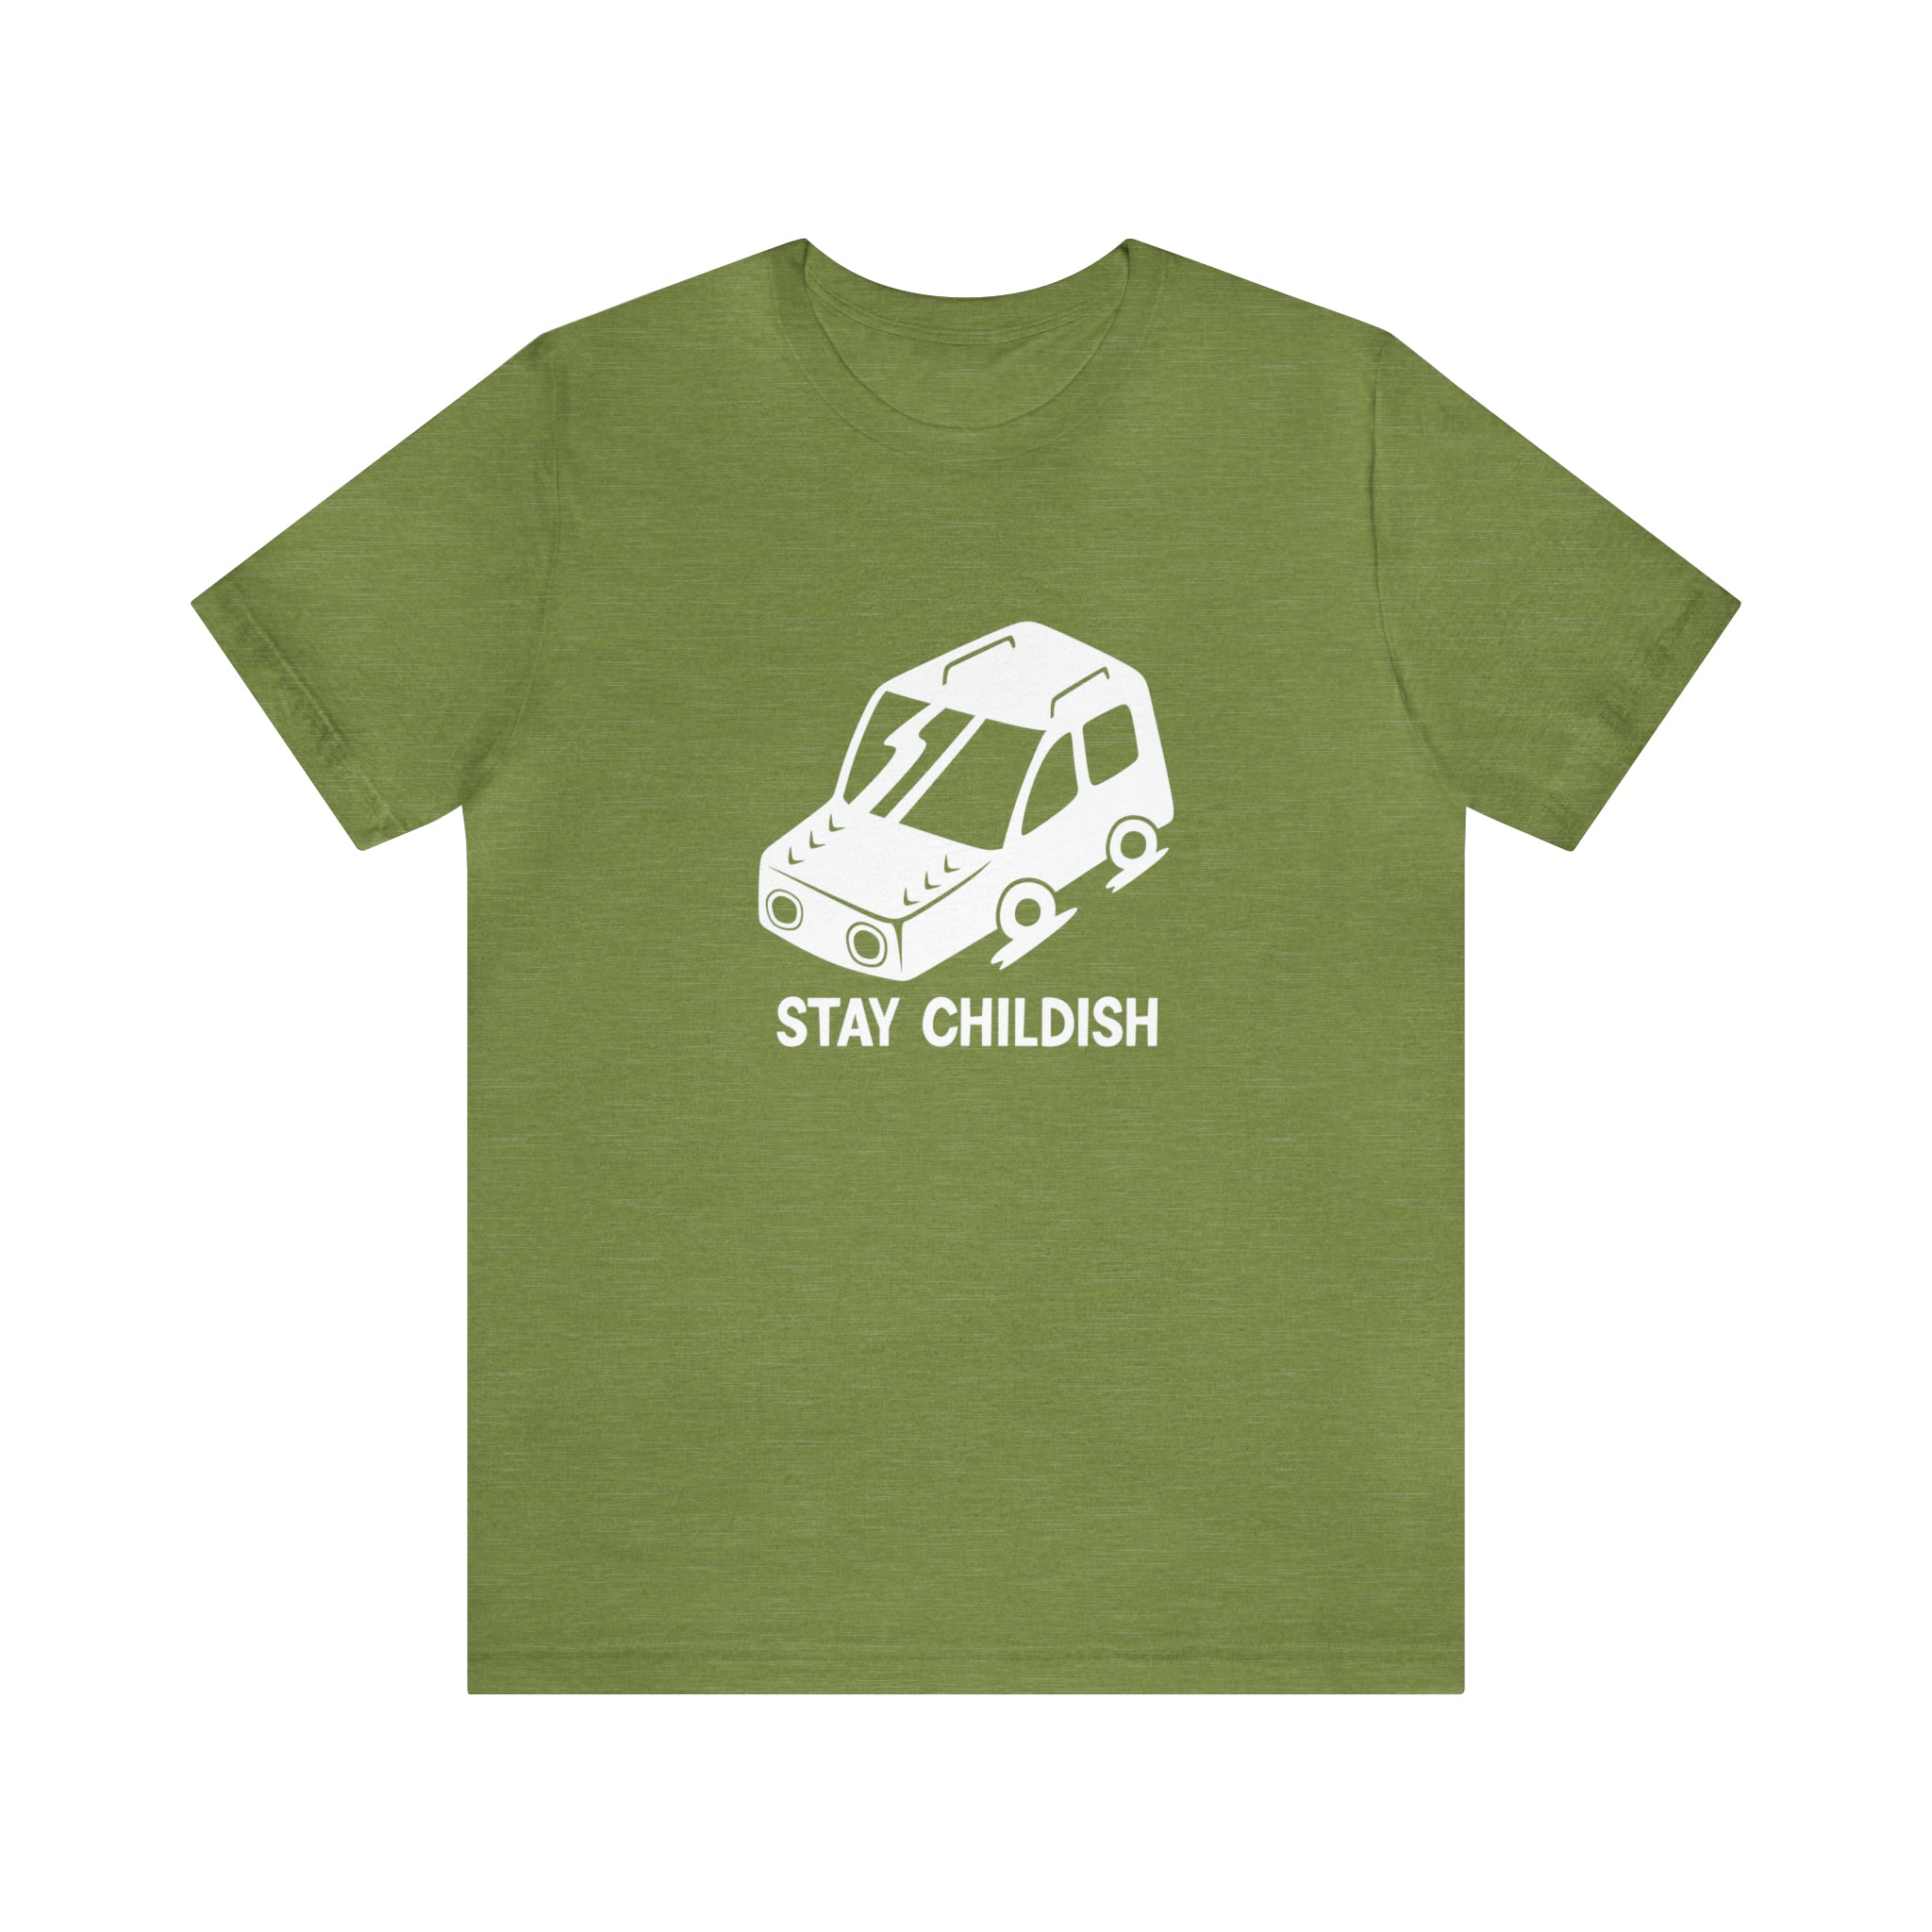 A green Stay Childish T-Shirt - perfect for those young at heart.